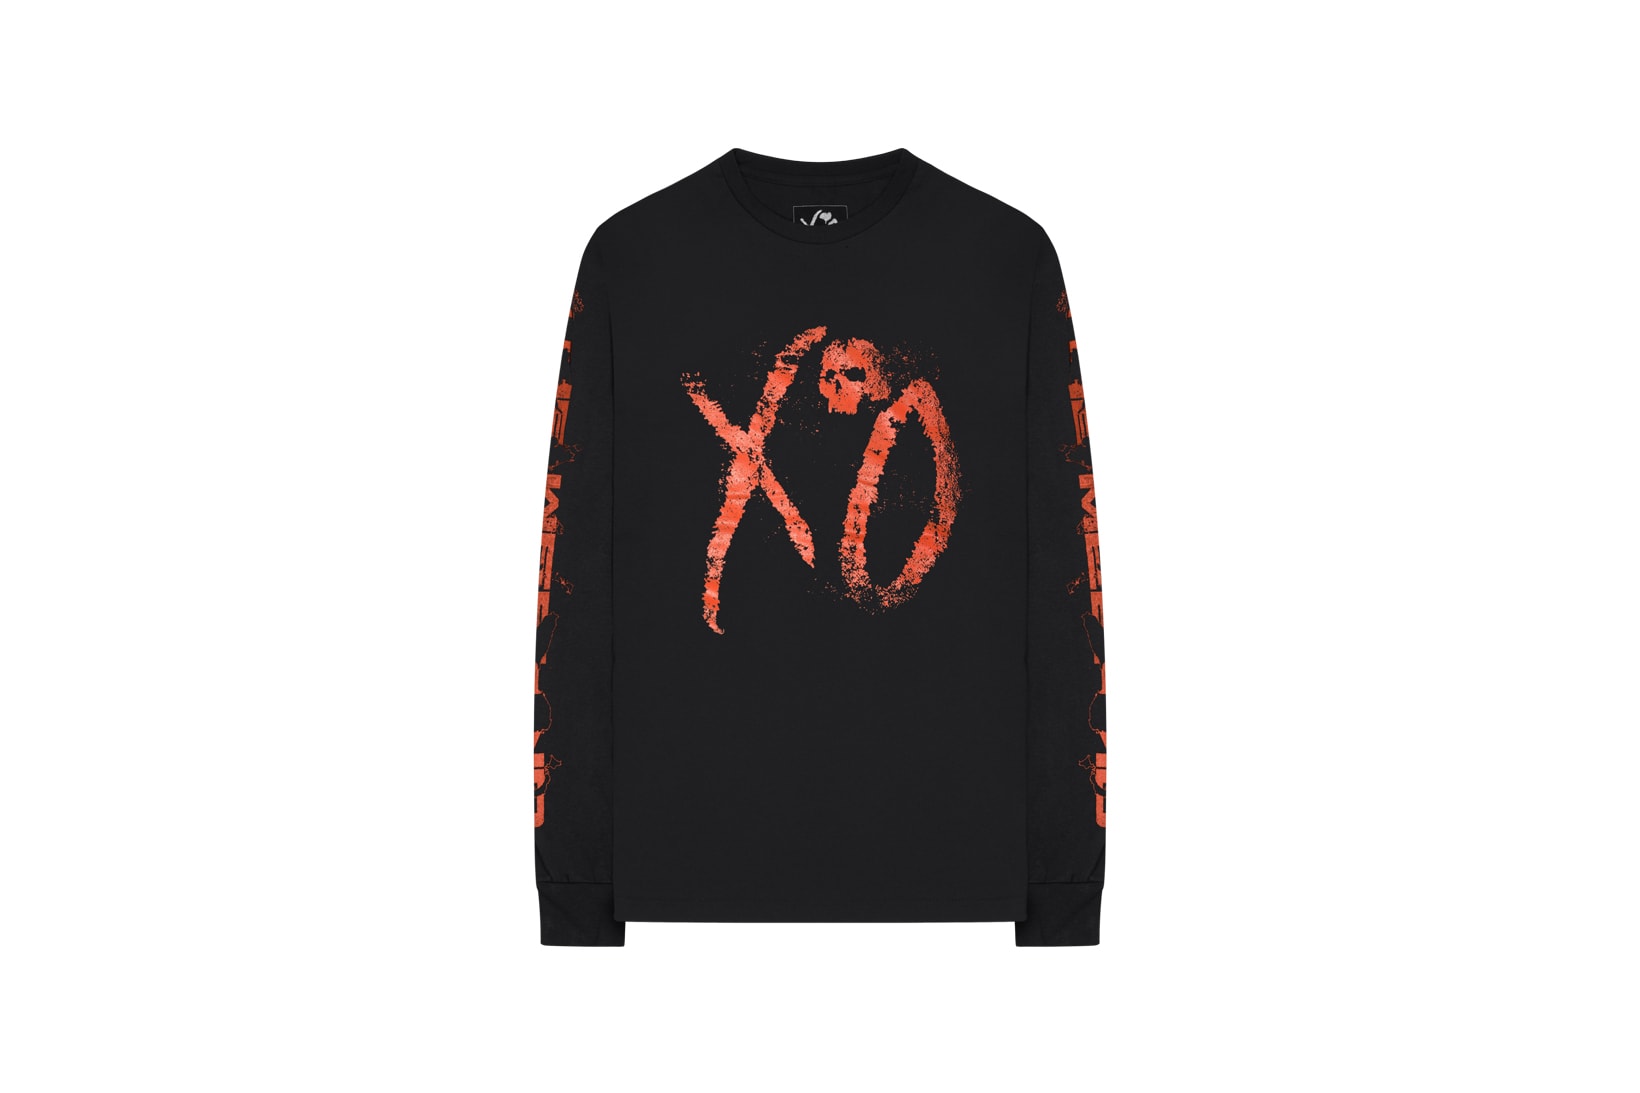 The Weeknd Releases Exclusive Asia Tour Merch